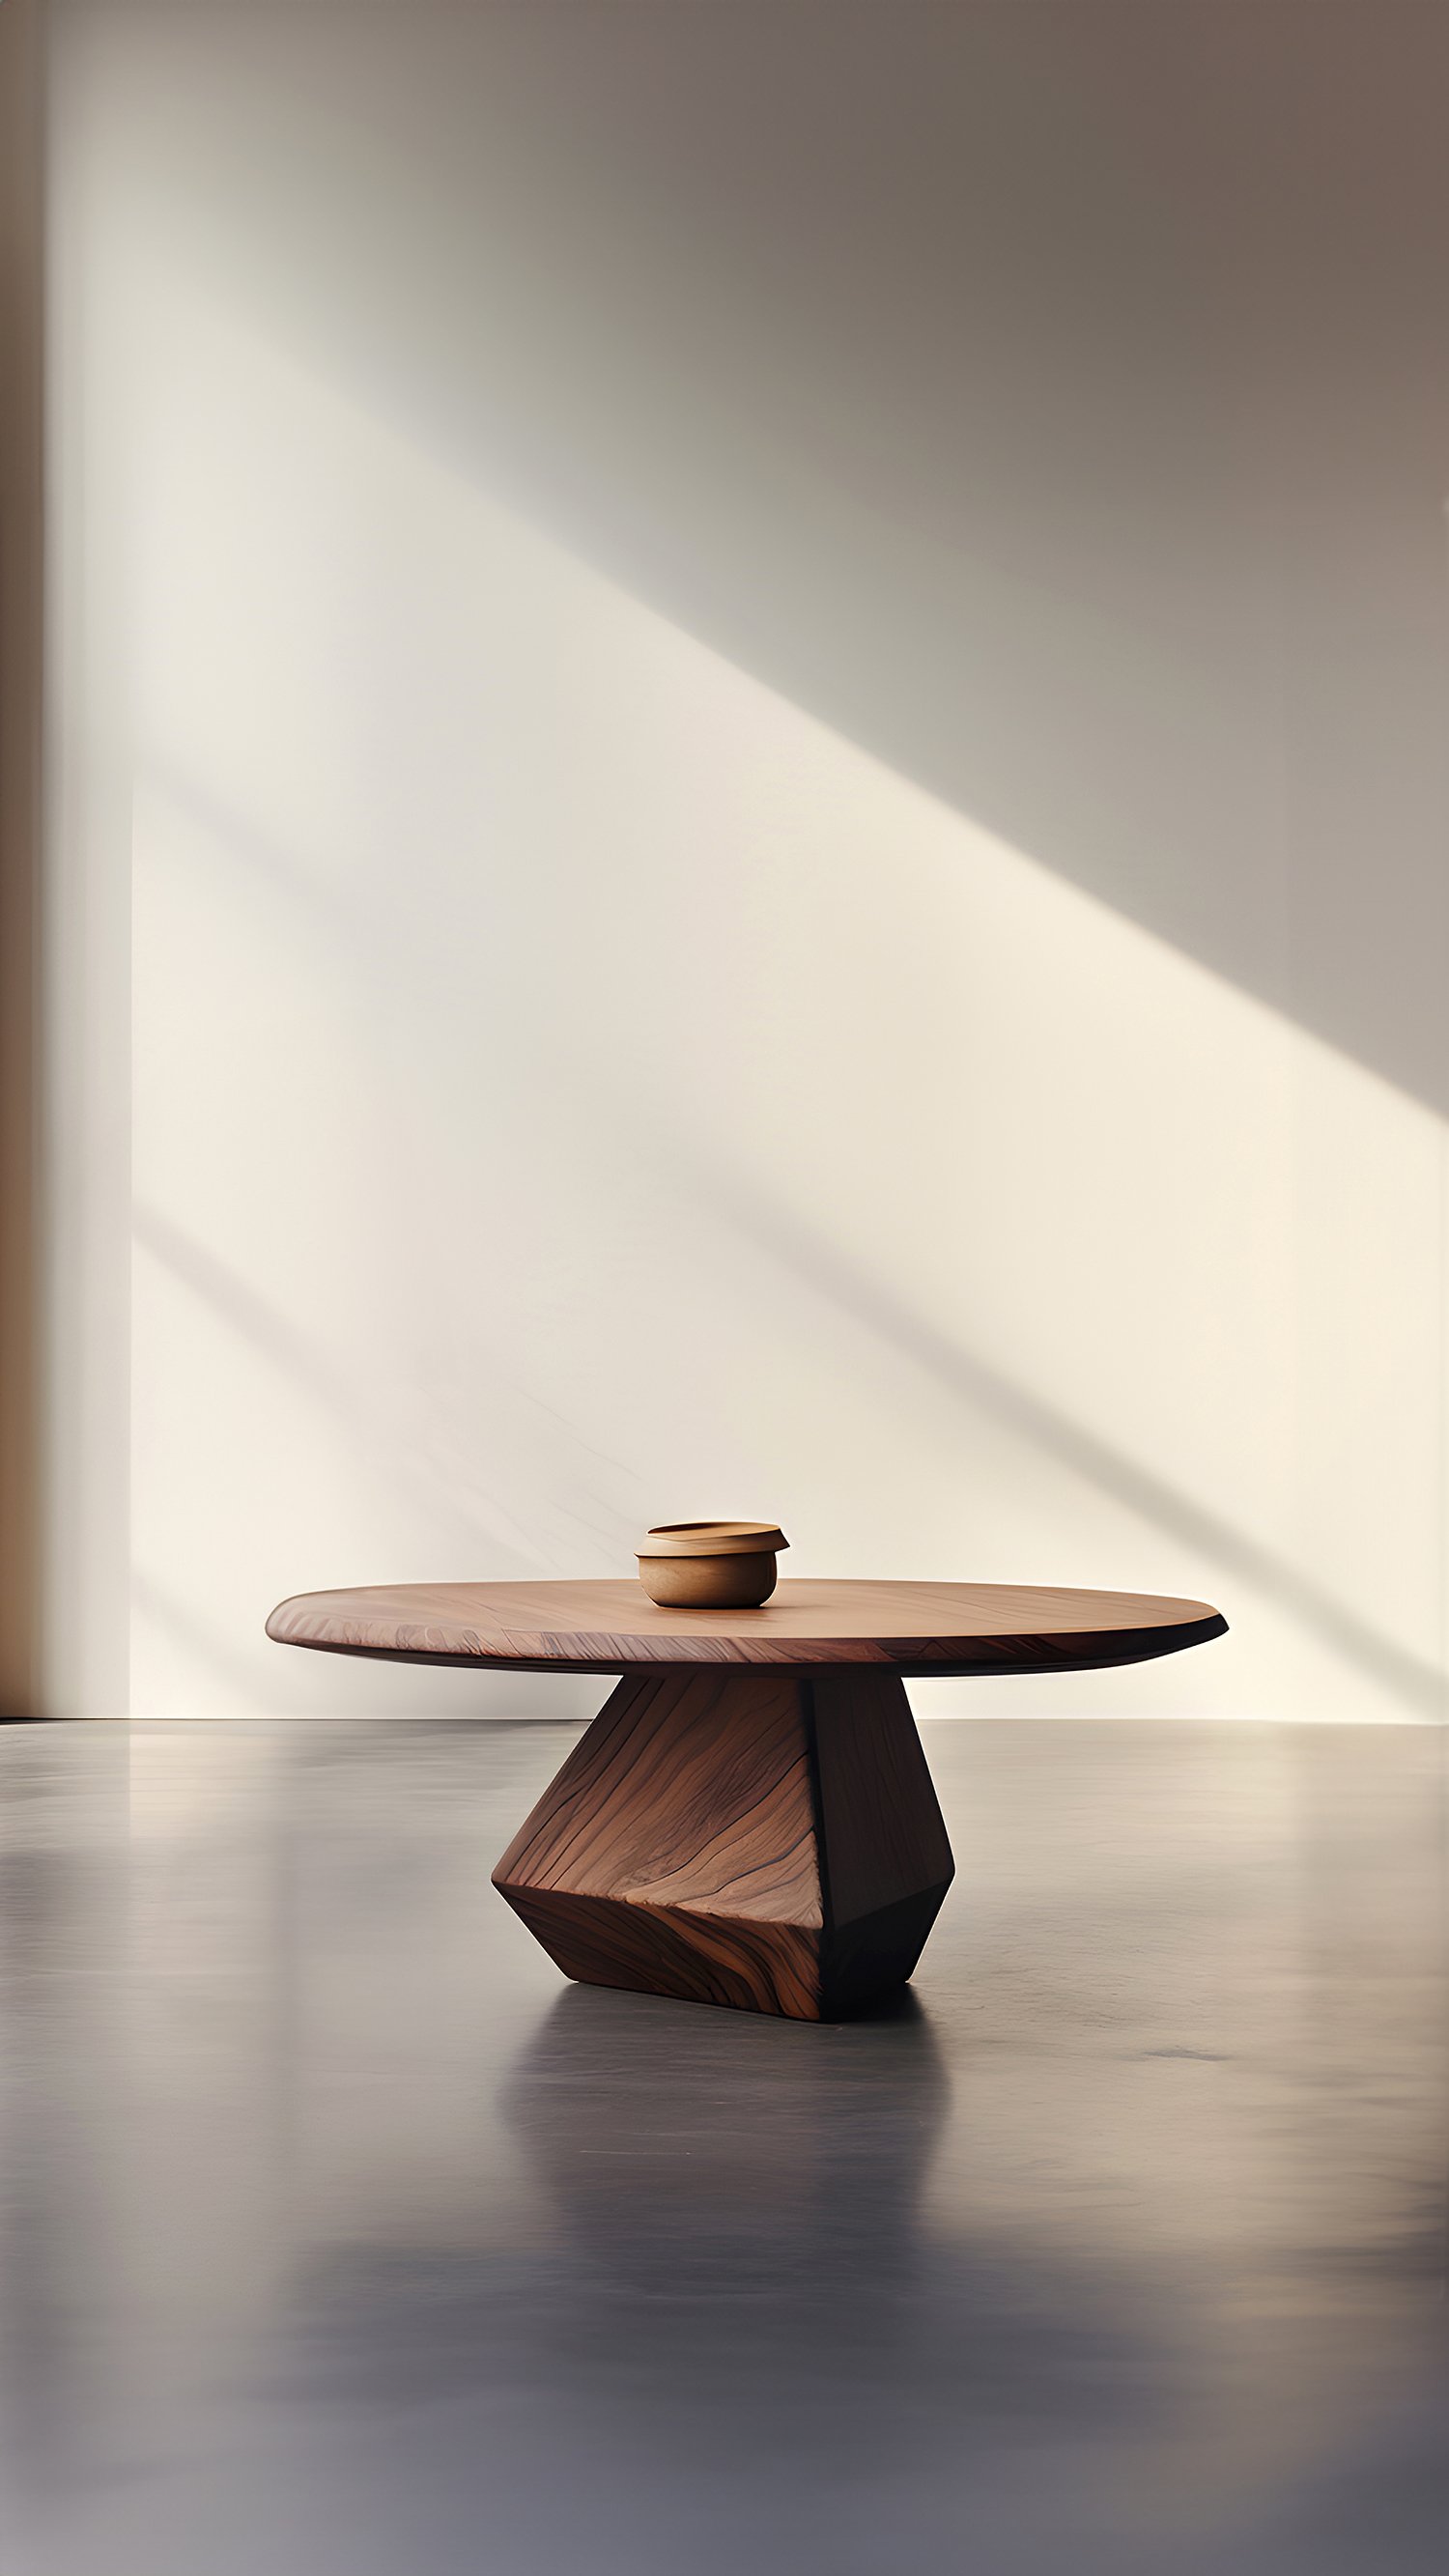 Sculptural Coffee Table Made of Solid Wood, Center Table Solace S29 by Joel Escalona — 8.jpg